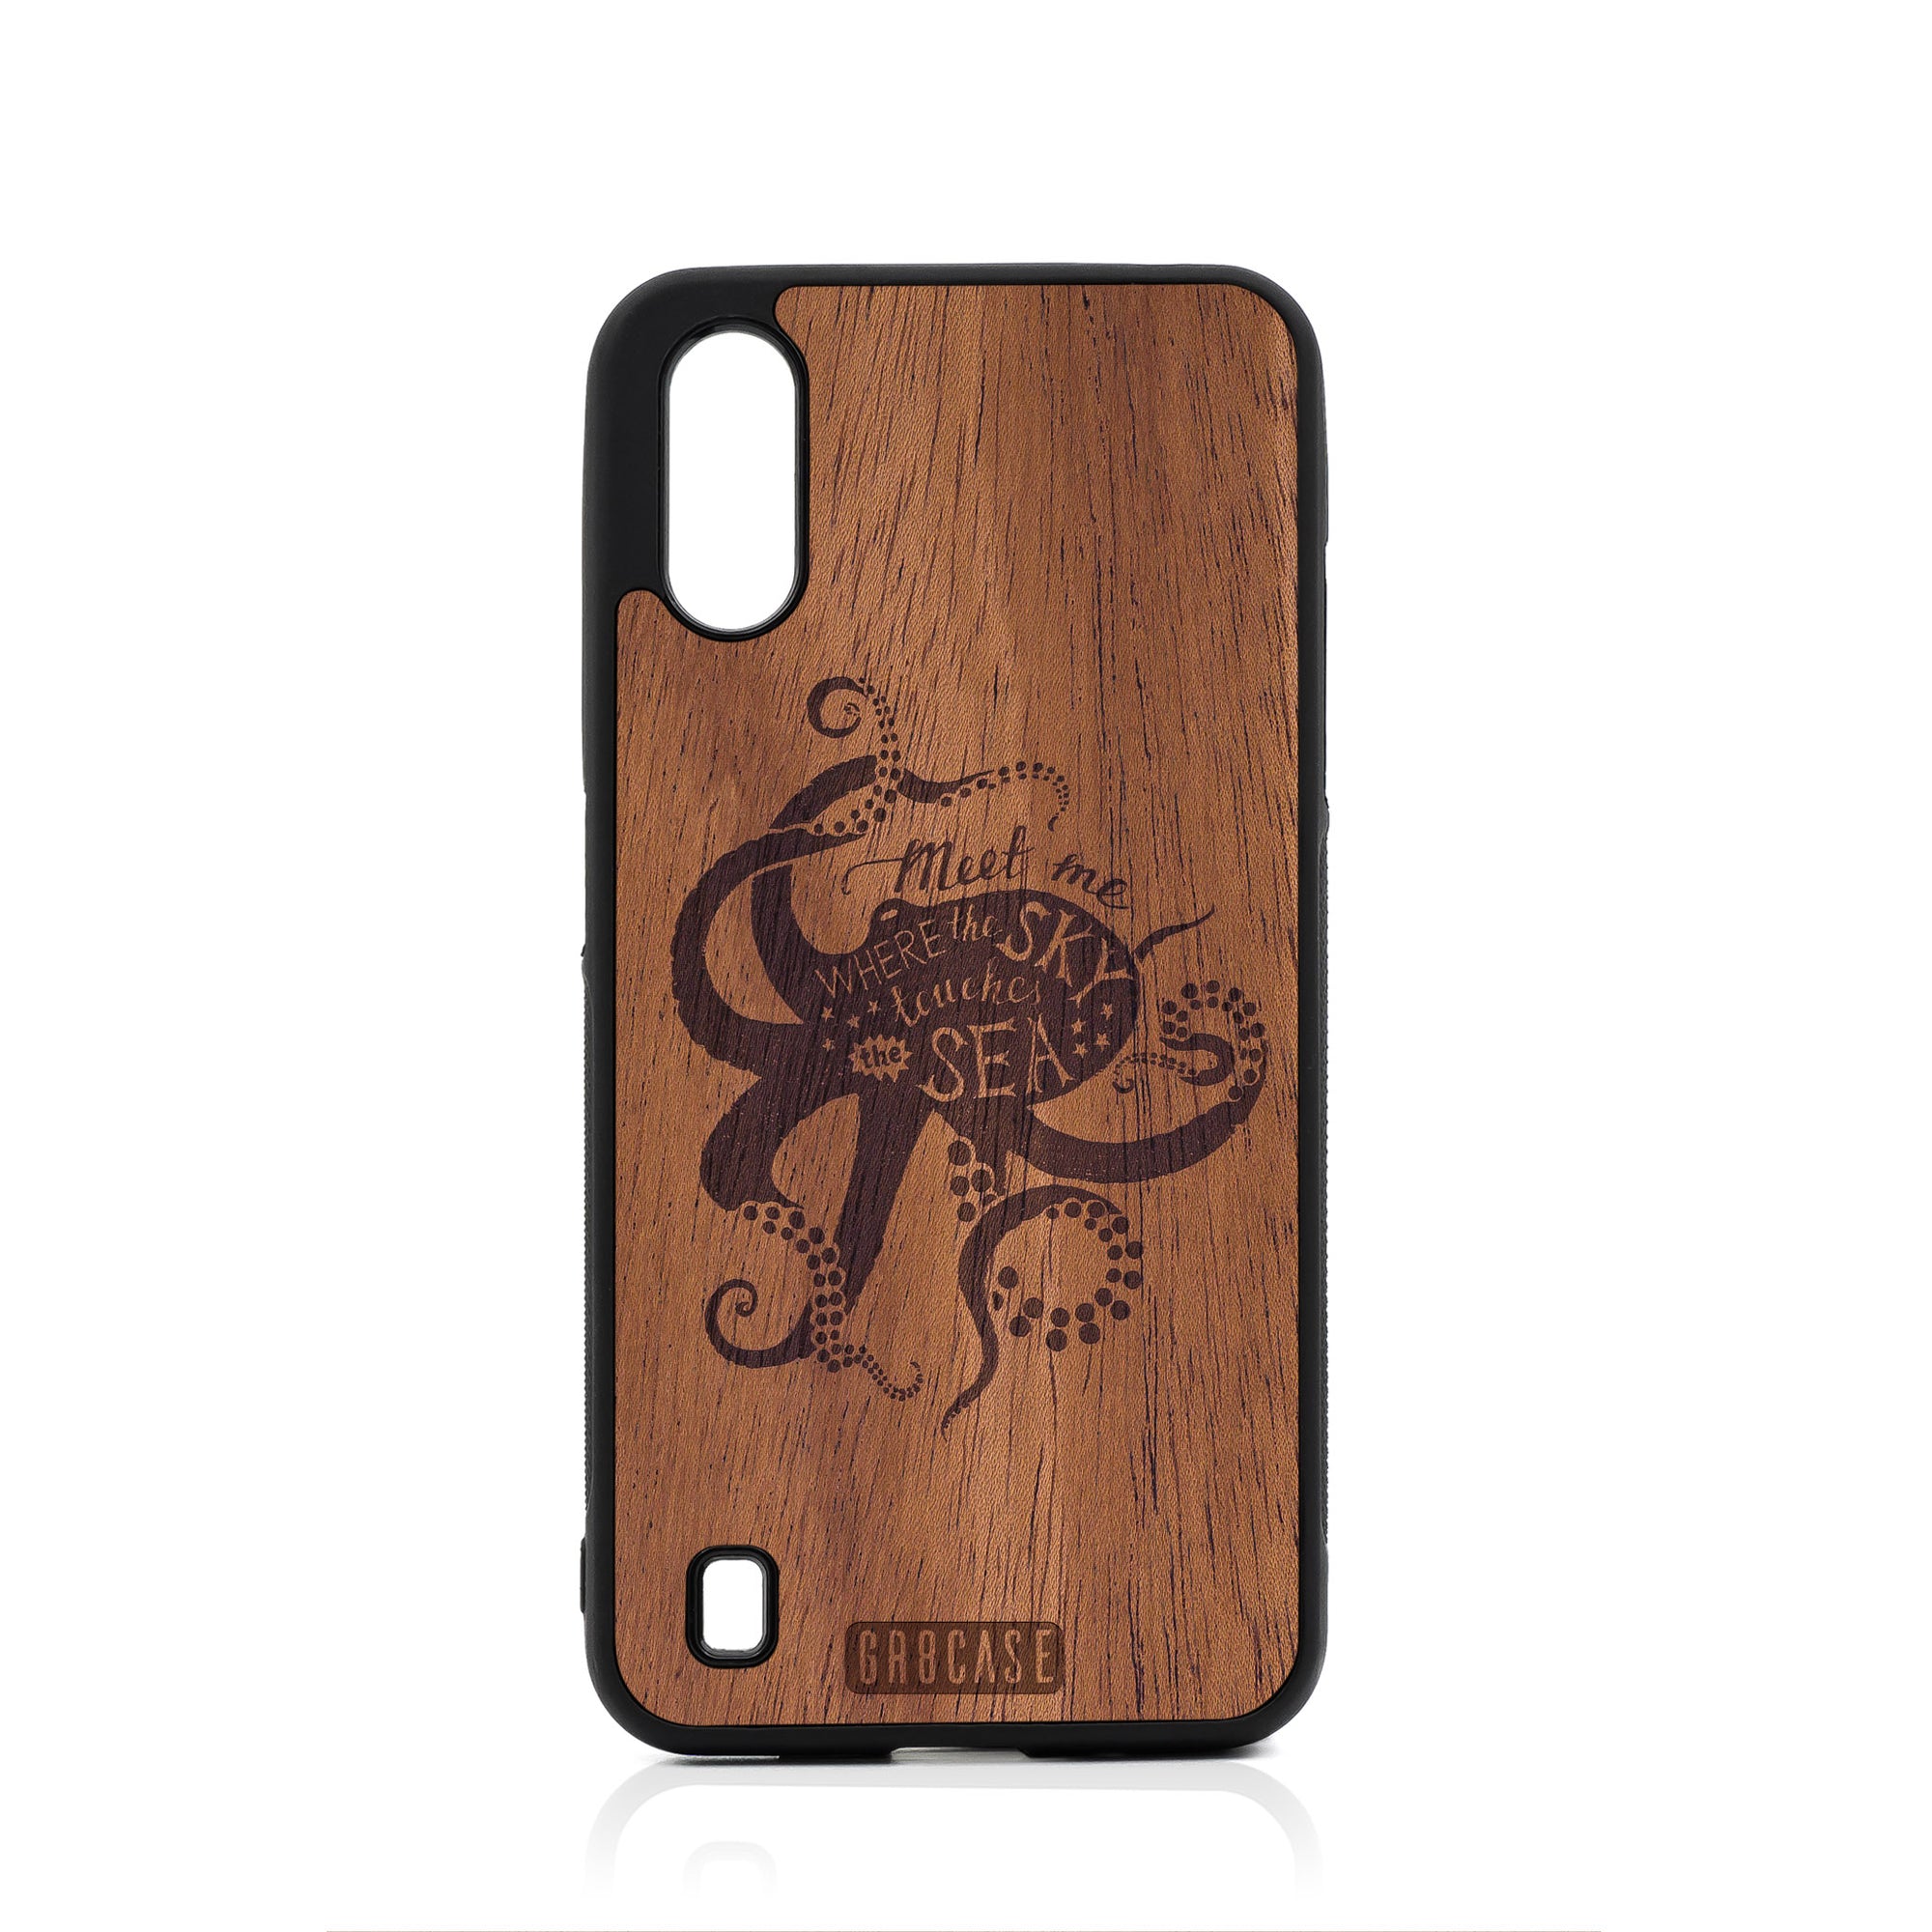 Meet Me Where The Sky Touches The Sea (Octopus) Design Wood Case For Samsung Galaxy A01